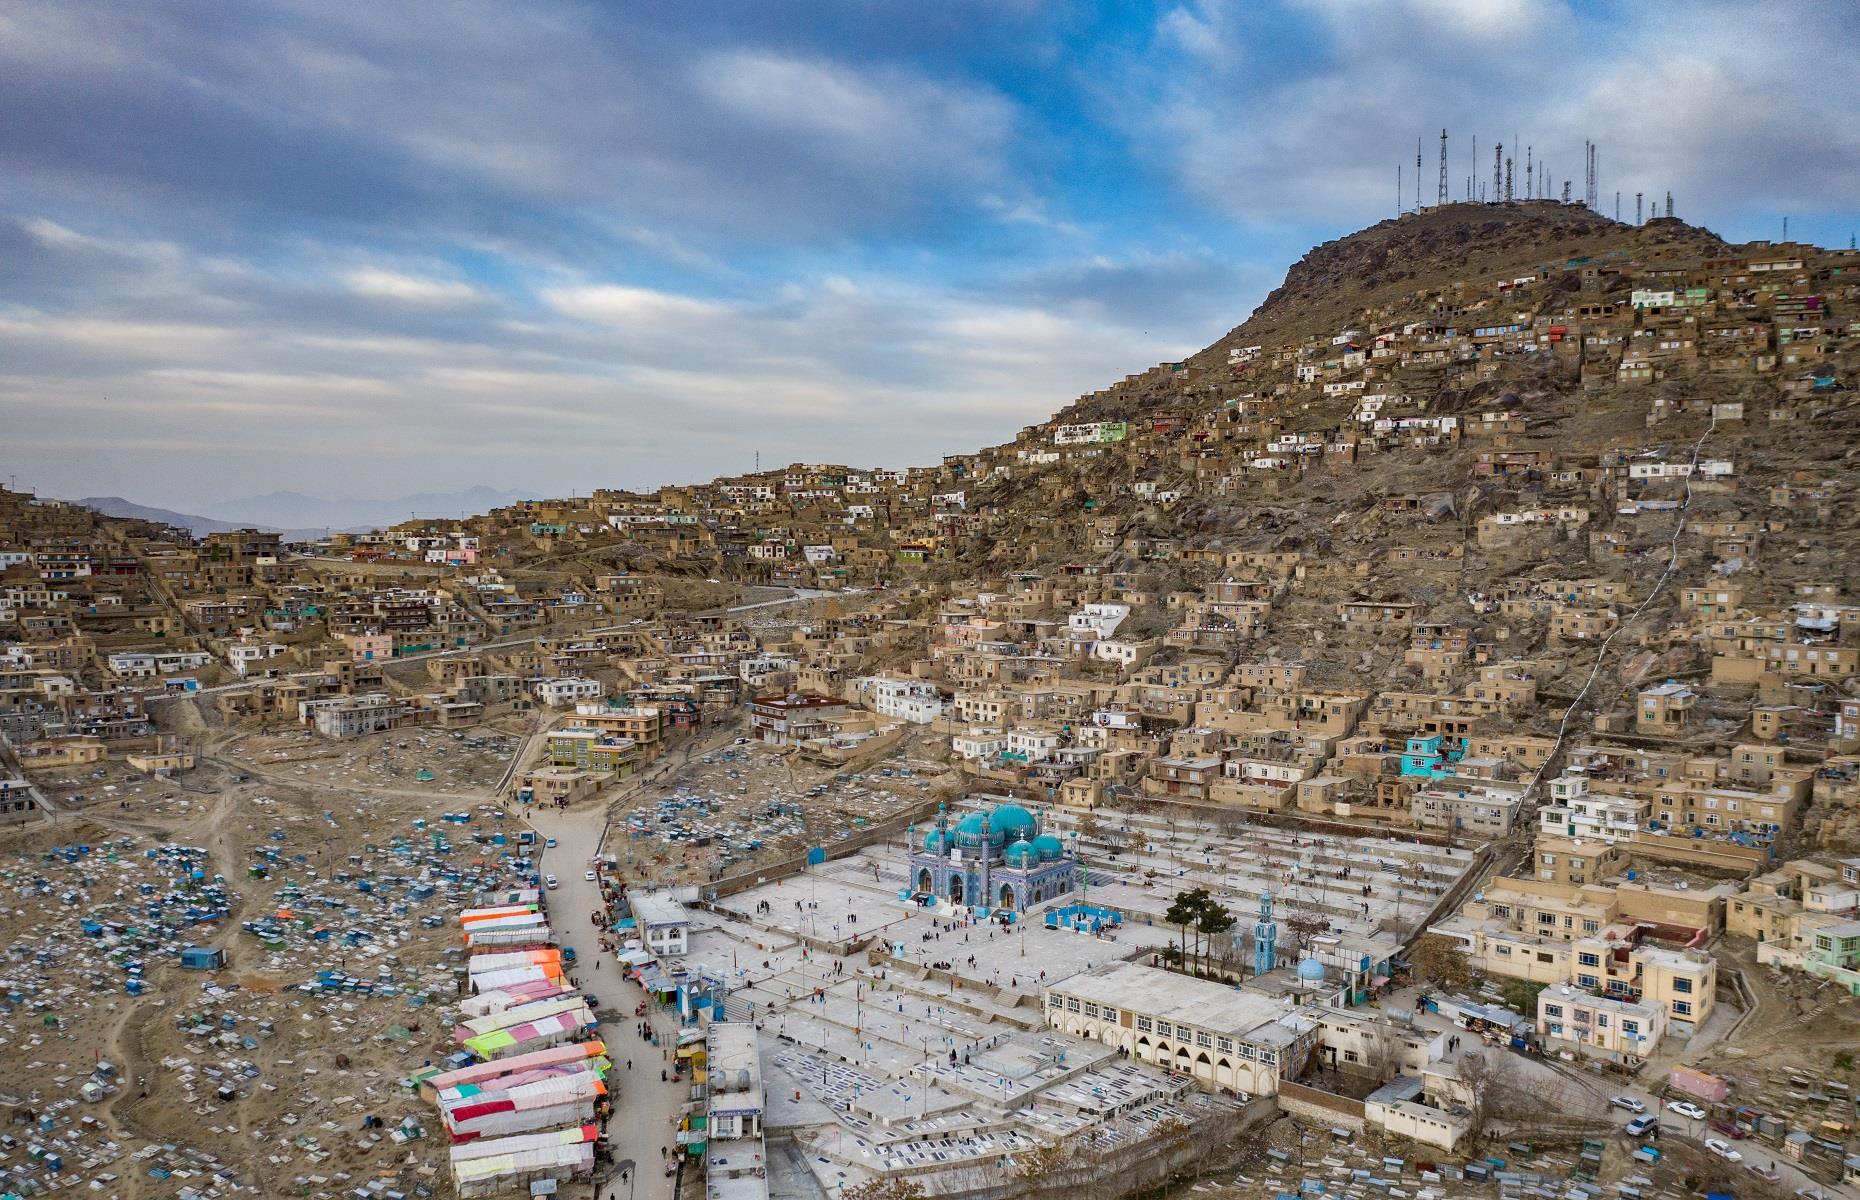 <p>In at number four is the capital of Afghanistan, Kabul. As the largest urban center in the country, Kabul has an estimated population of 4.4 million people. With a complex history of political conflict and a unique landscape, Kabul has been used for numerous war dramas, such as <em>1,000 Times Good Night</em>, as well as plenty of national productions, including <em>Osama</em>.</p>